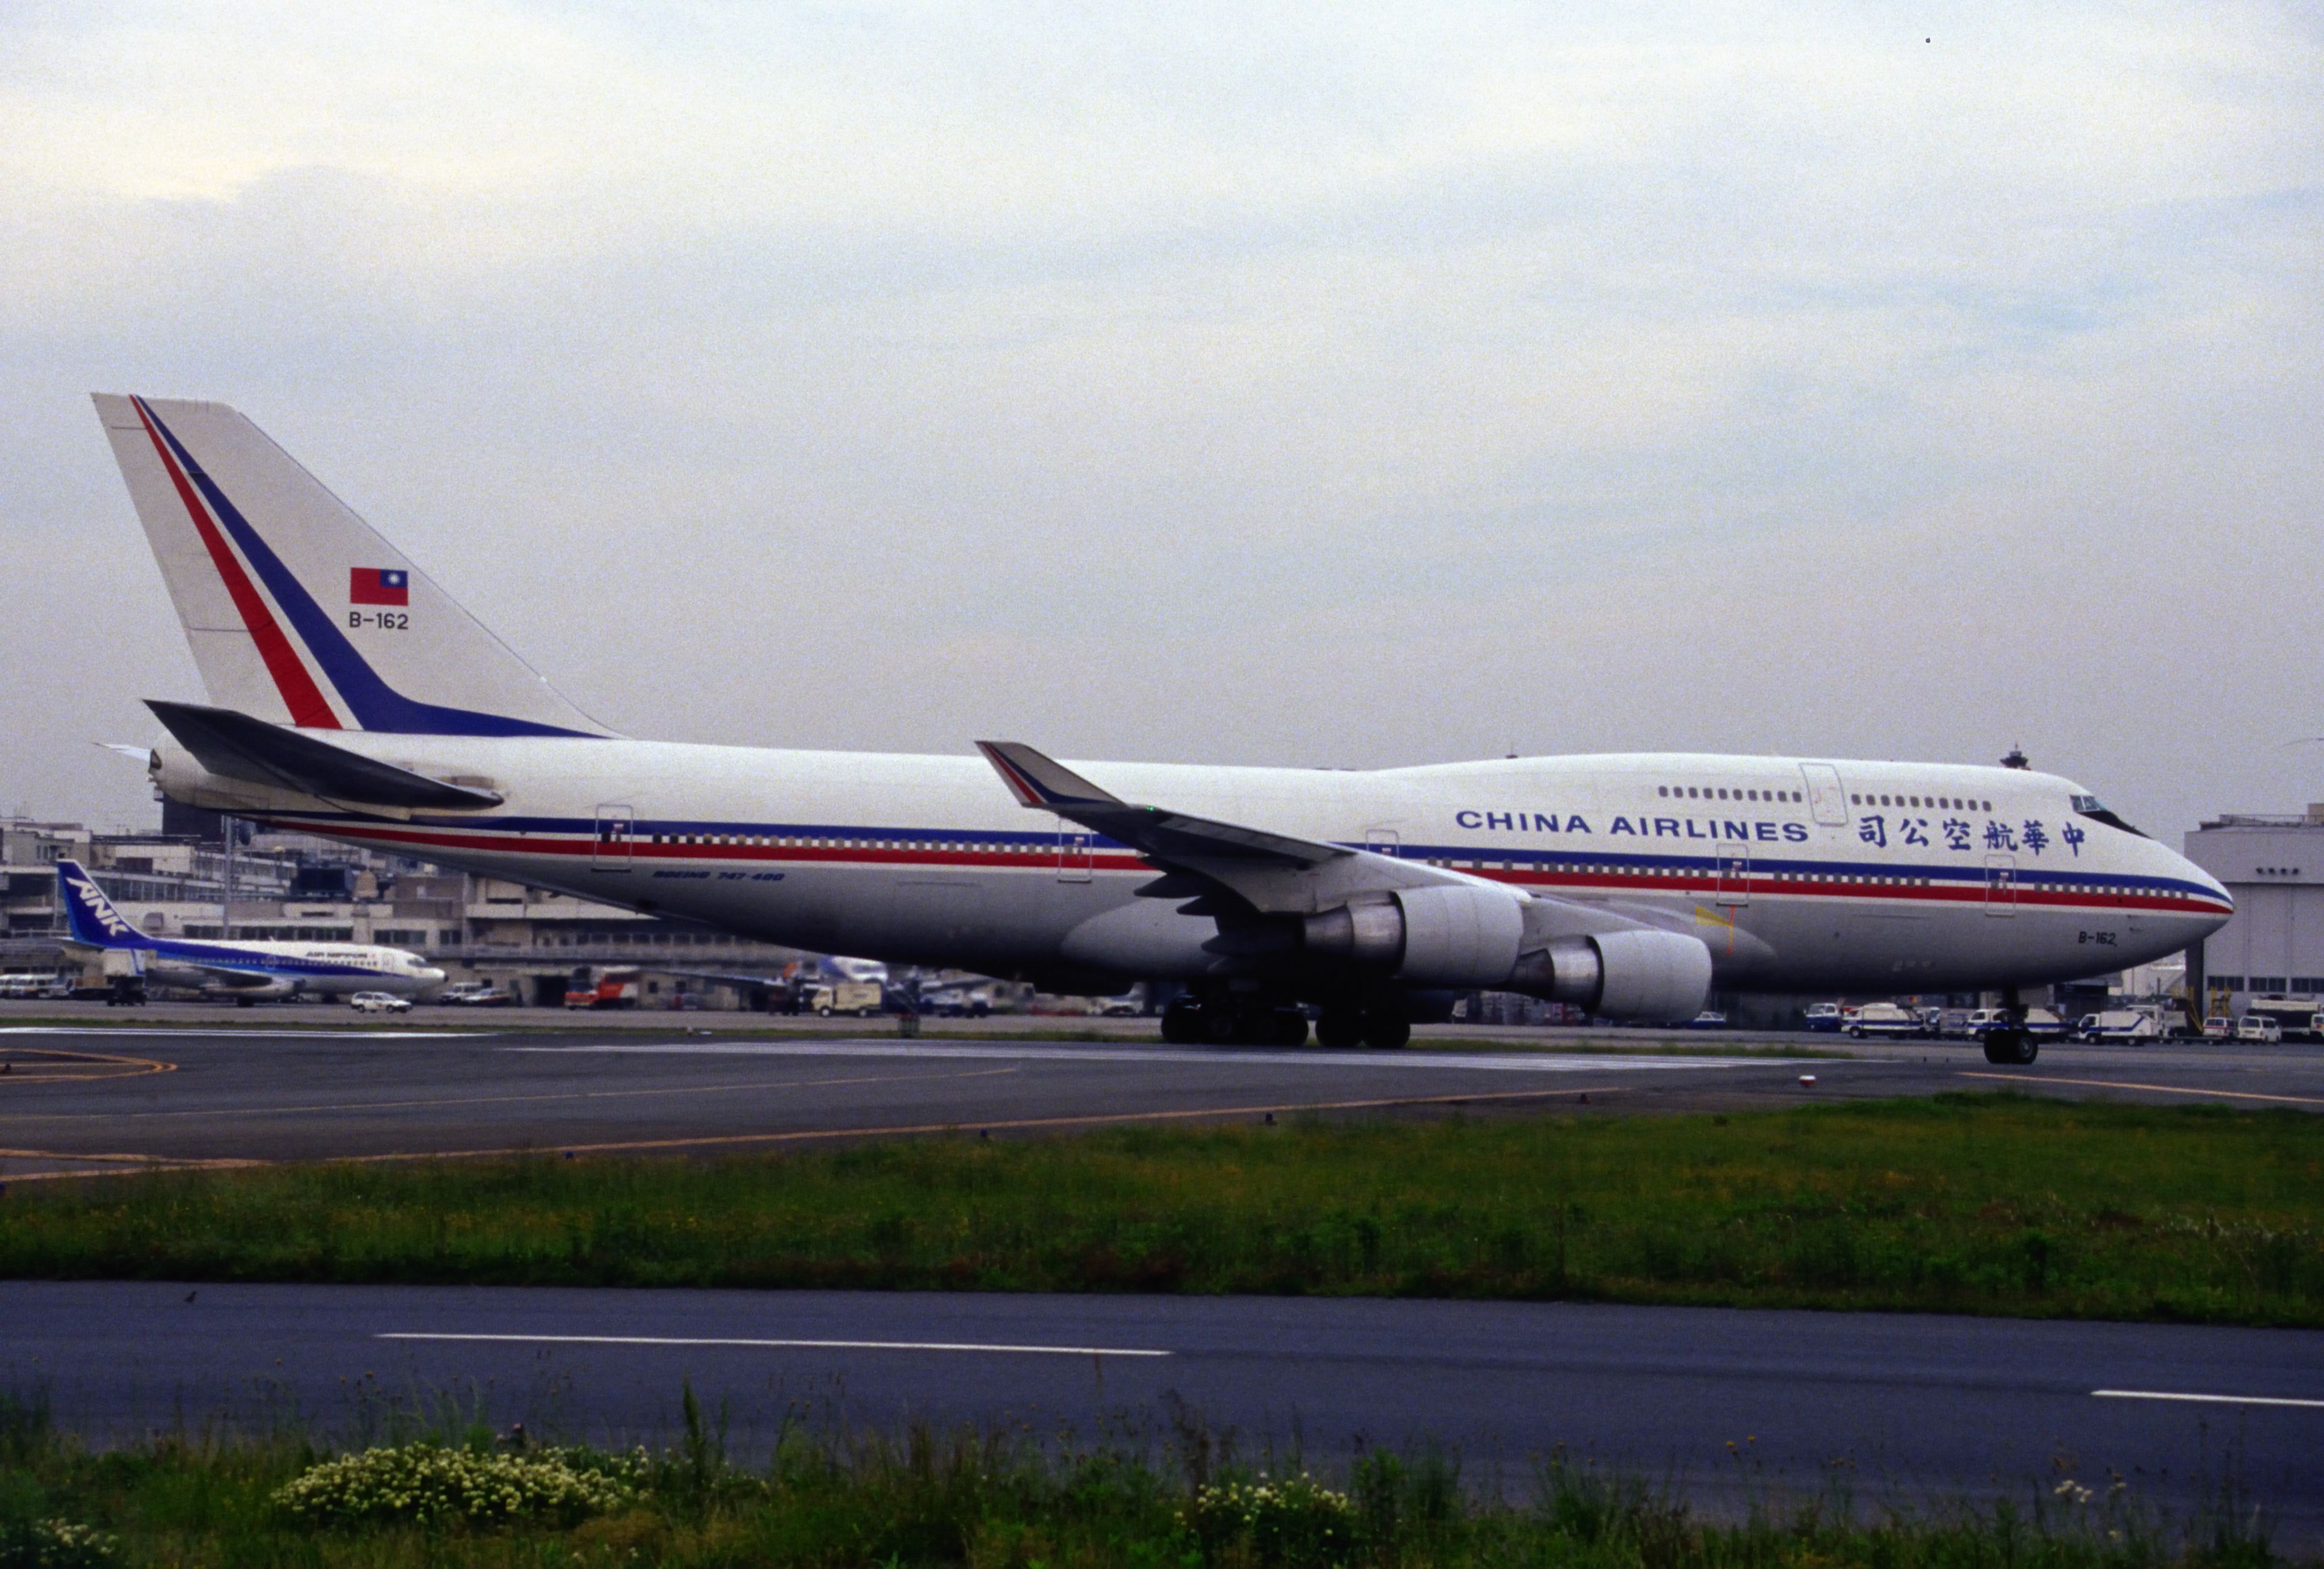 A China Airlines Boeing 747-400